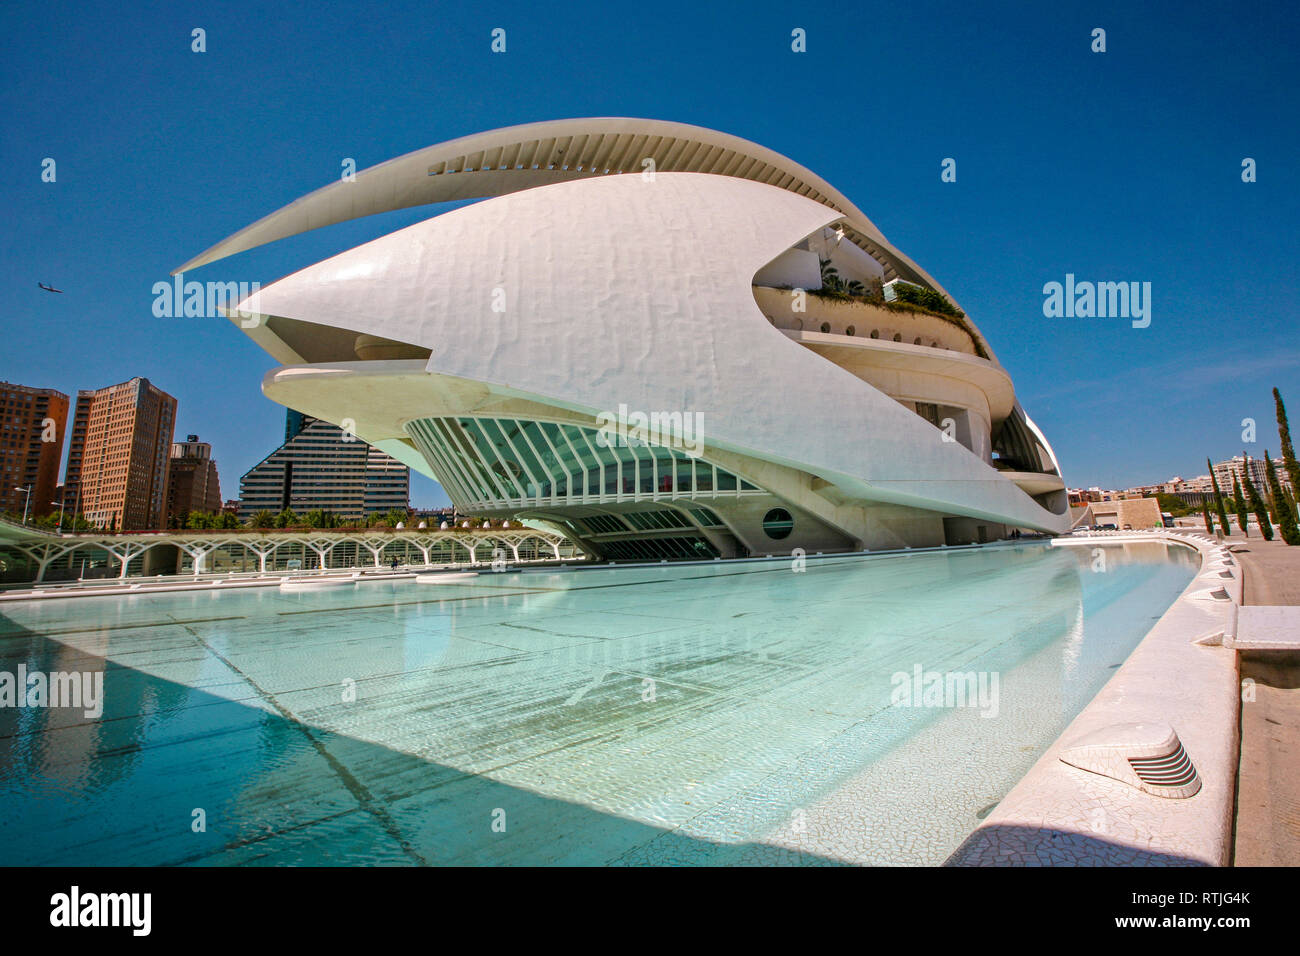 Spain Valencia Palace of Science and Technology - Queen Sofia Palace of Arts Stock Photo